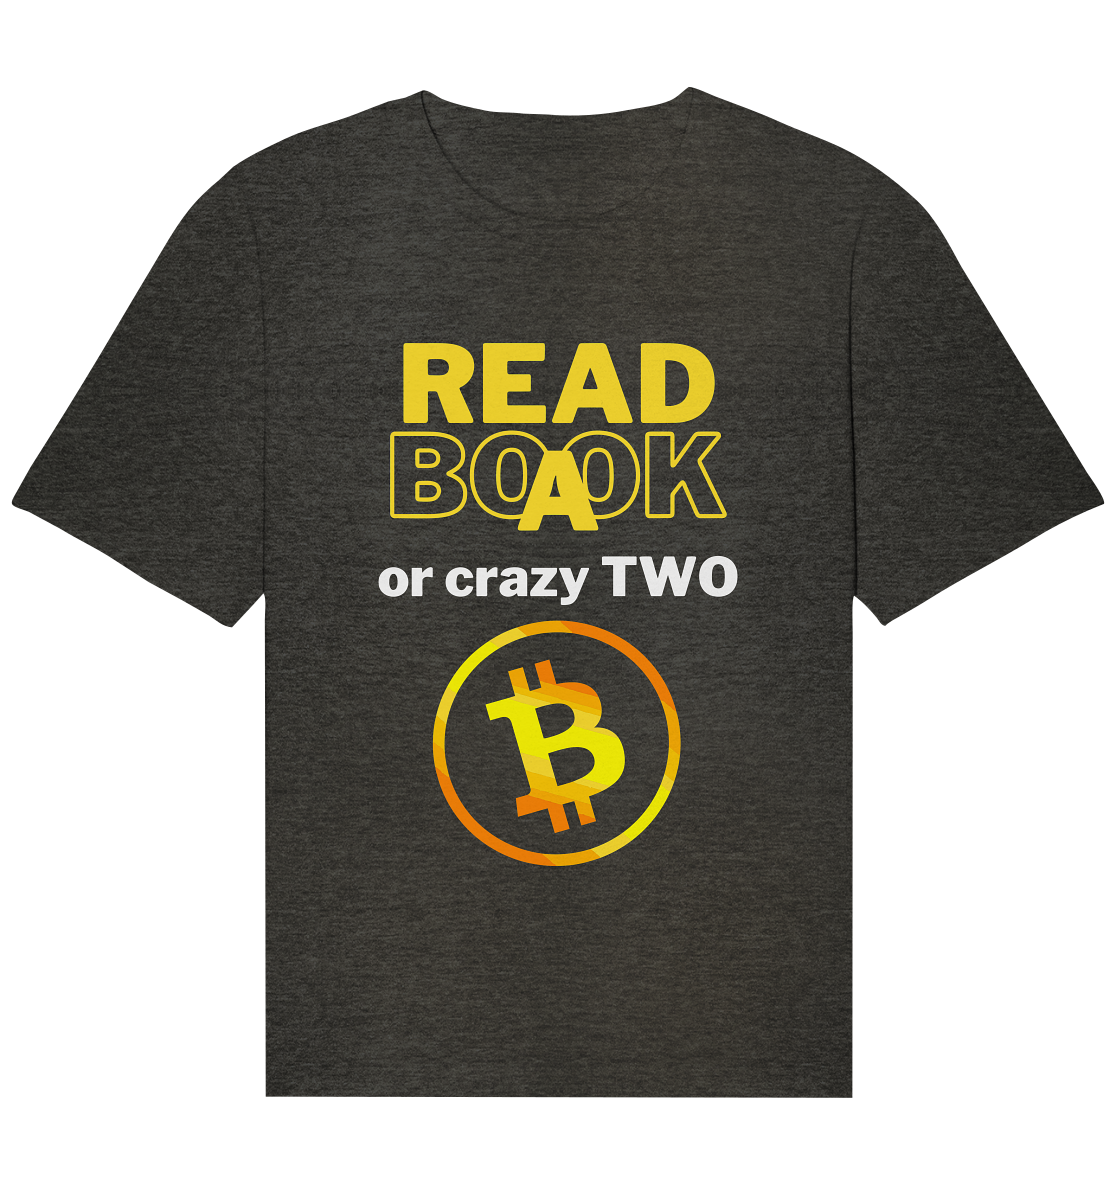 READ A BOOK or CRAZY TWO - Variante "Book" im Hintergrund - Organic Relaxed Shirt